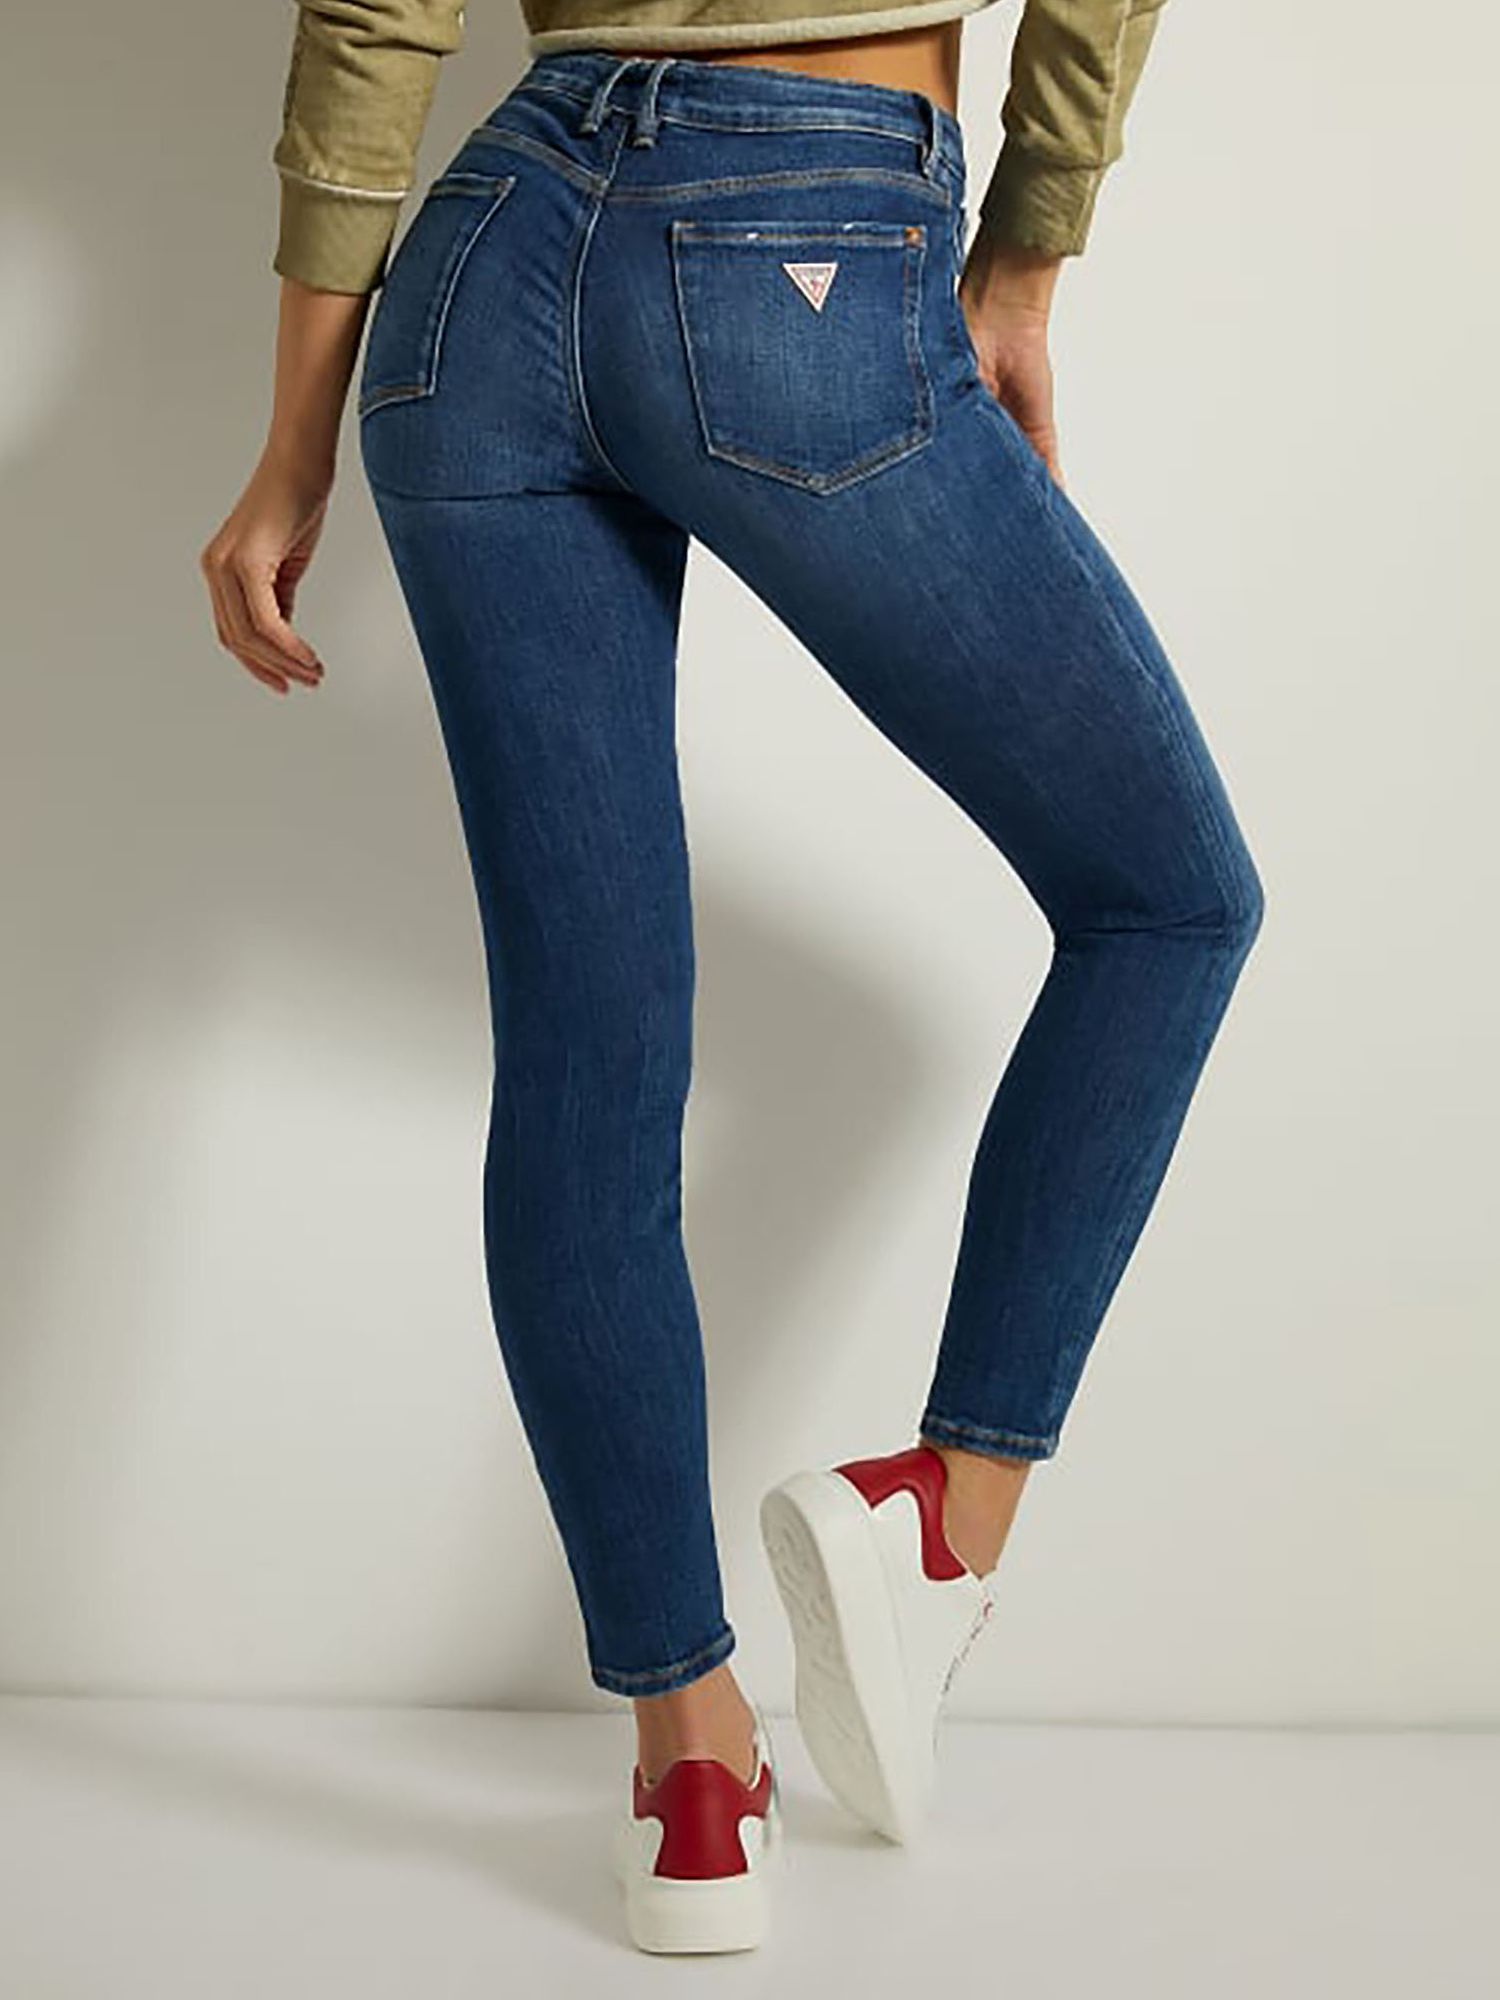 GUESS Annette Skinny Fit Denim Jeans, Carrie Mid, W29/L30